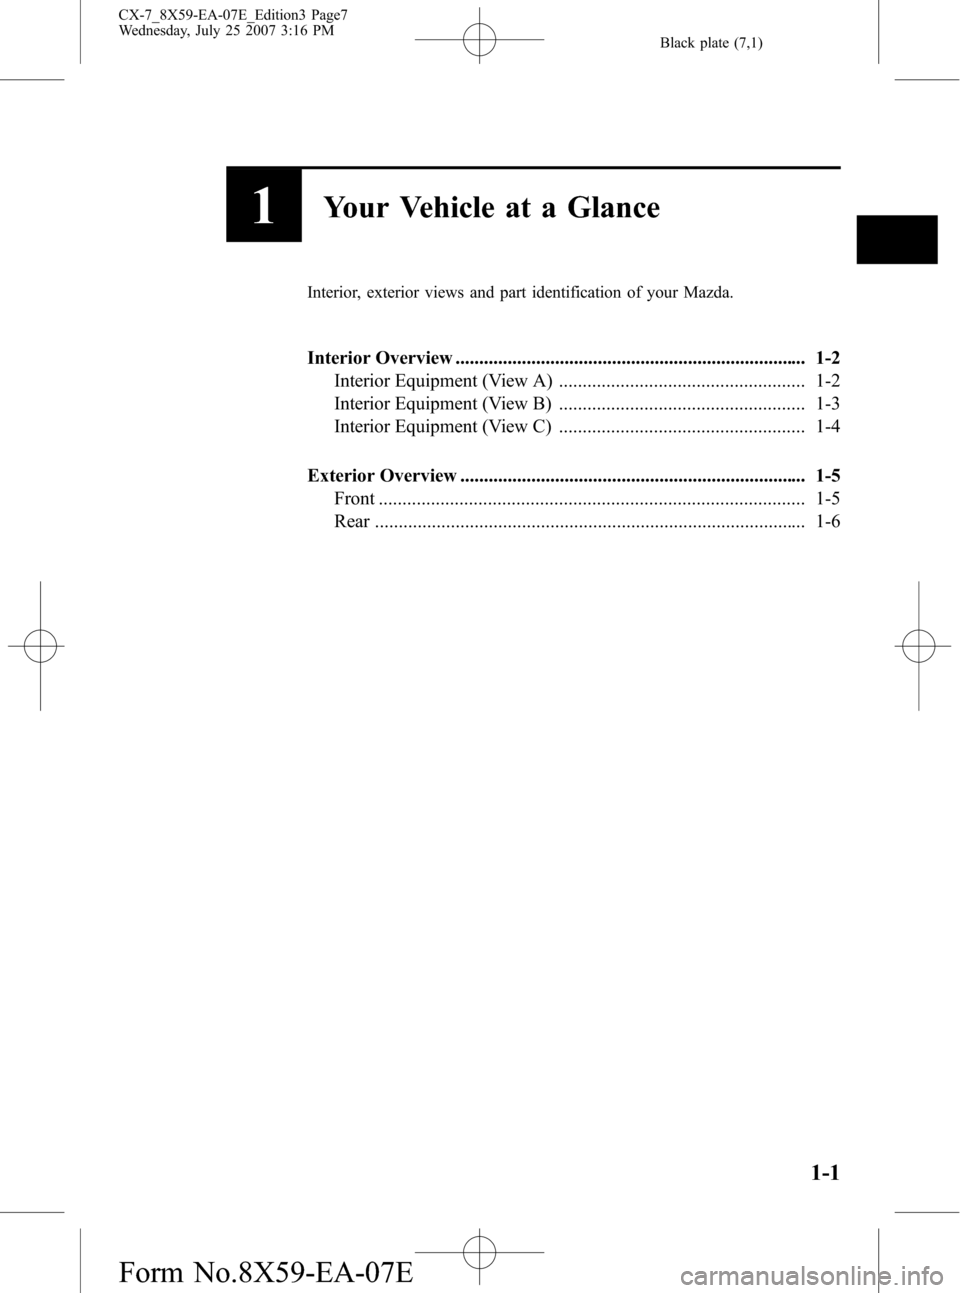 MAZDA MODEL CX-7 2008  Owners Manual (in English) Black plate (7,1)
1Your Vehicle at a Glance
Interior, exterior views and part identification of your Mazda.
Interior Overview ..........................................................................